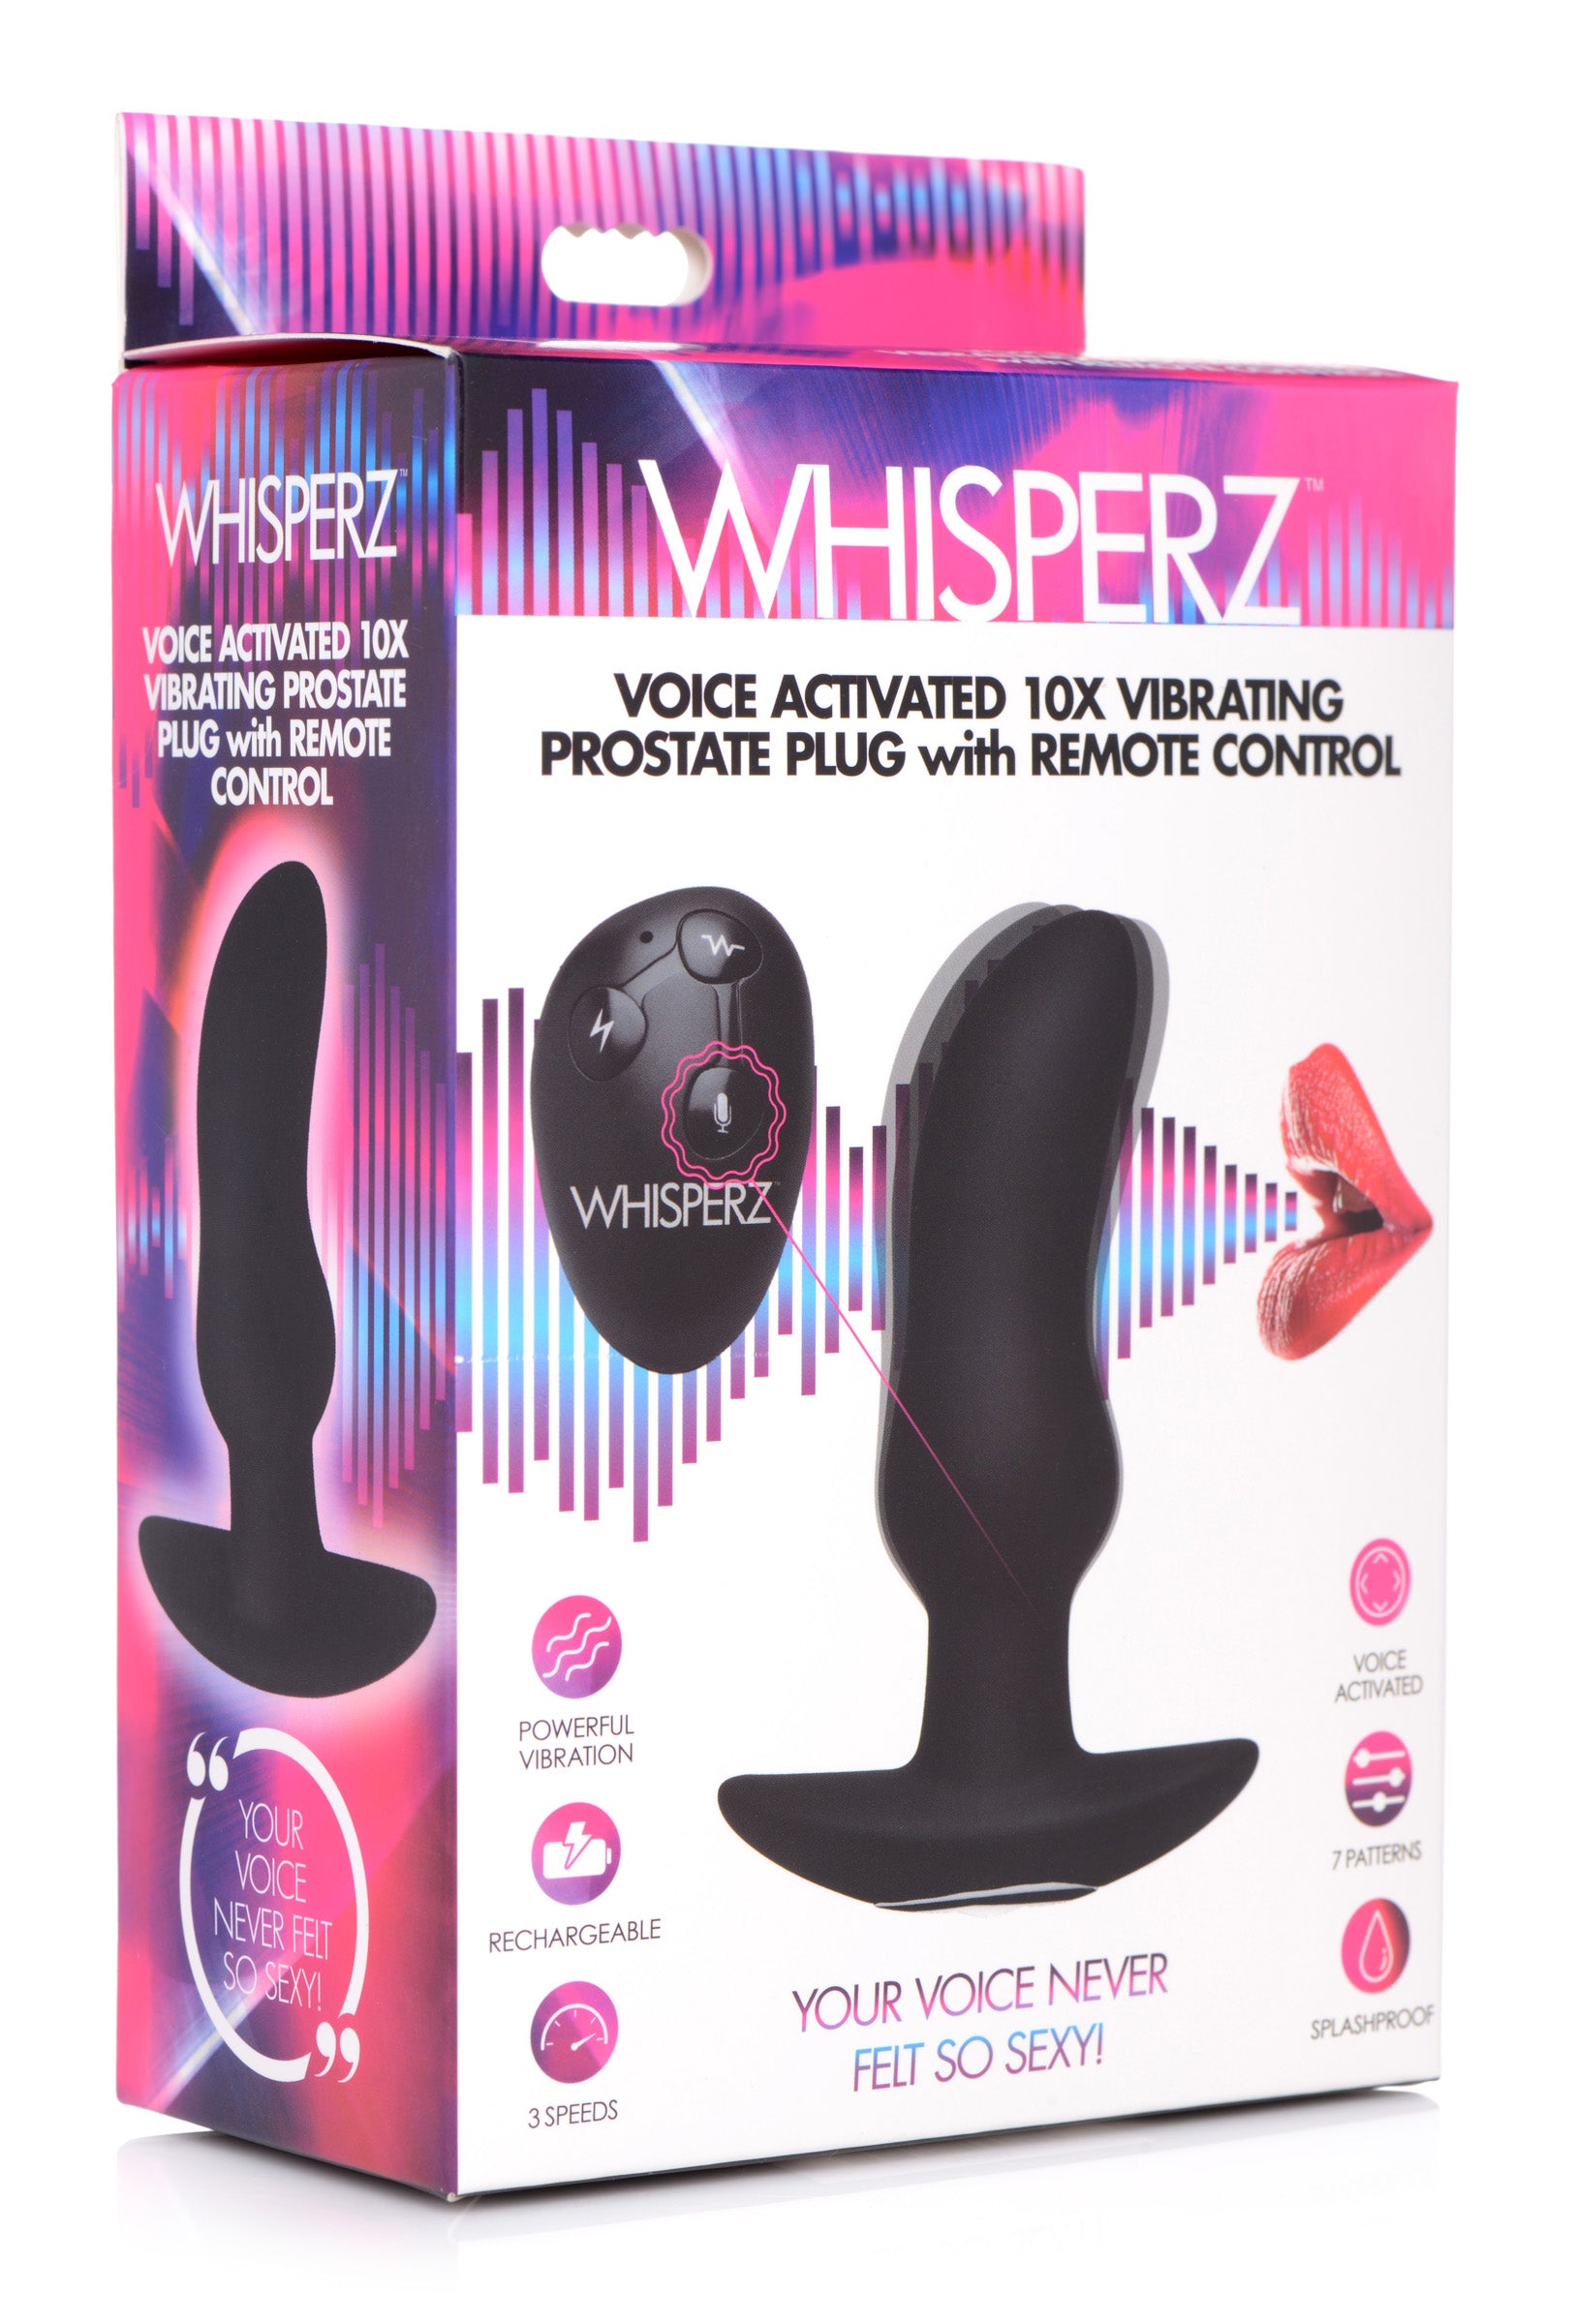 Voice Activated 10X Vibrating Prostate Plug with Remote Control - UABDSM